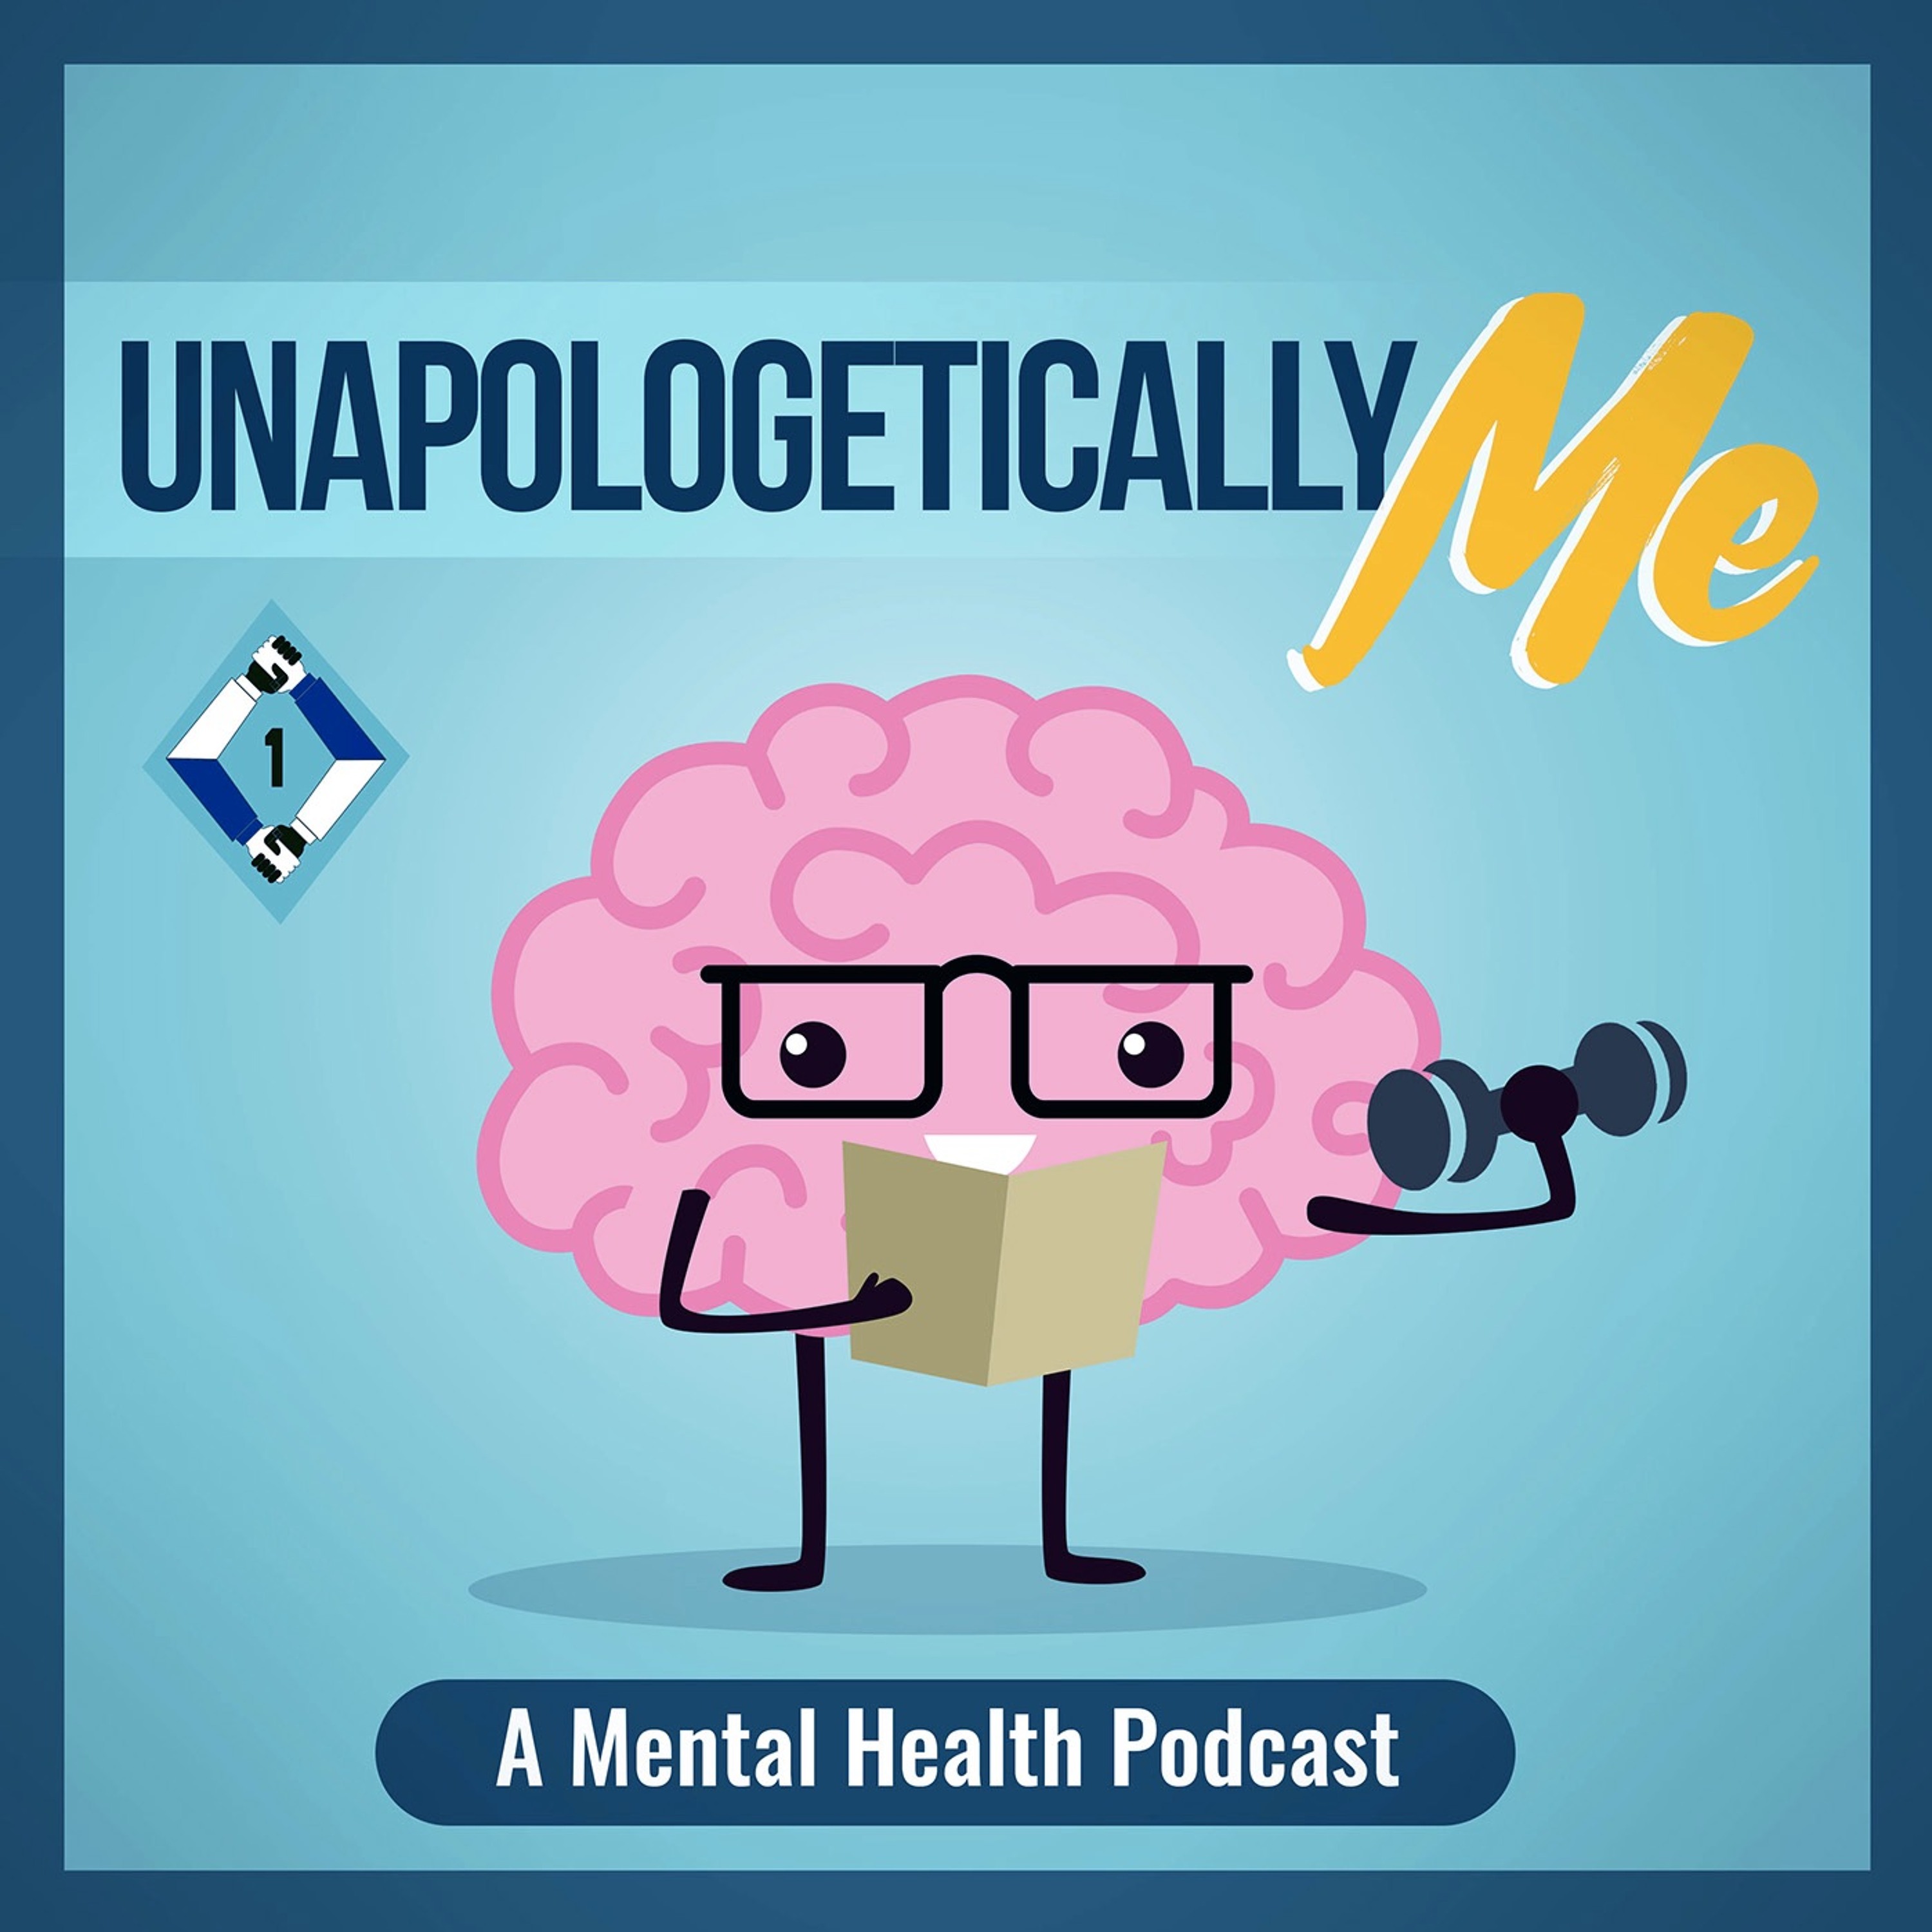 Unapologetically Me: A Mental Health Podcast - Ty Speaks